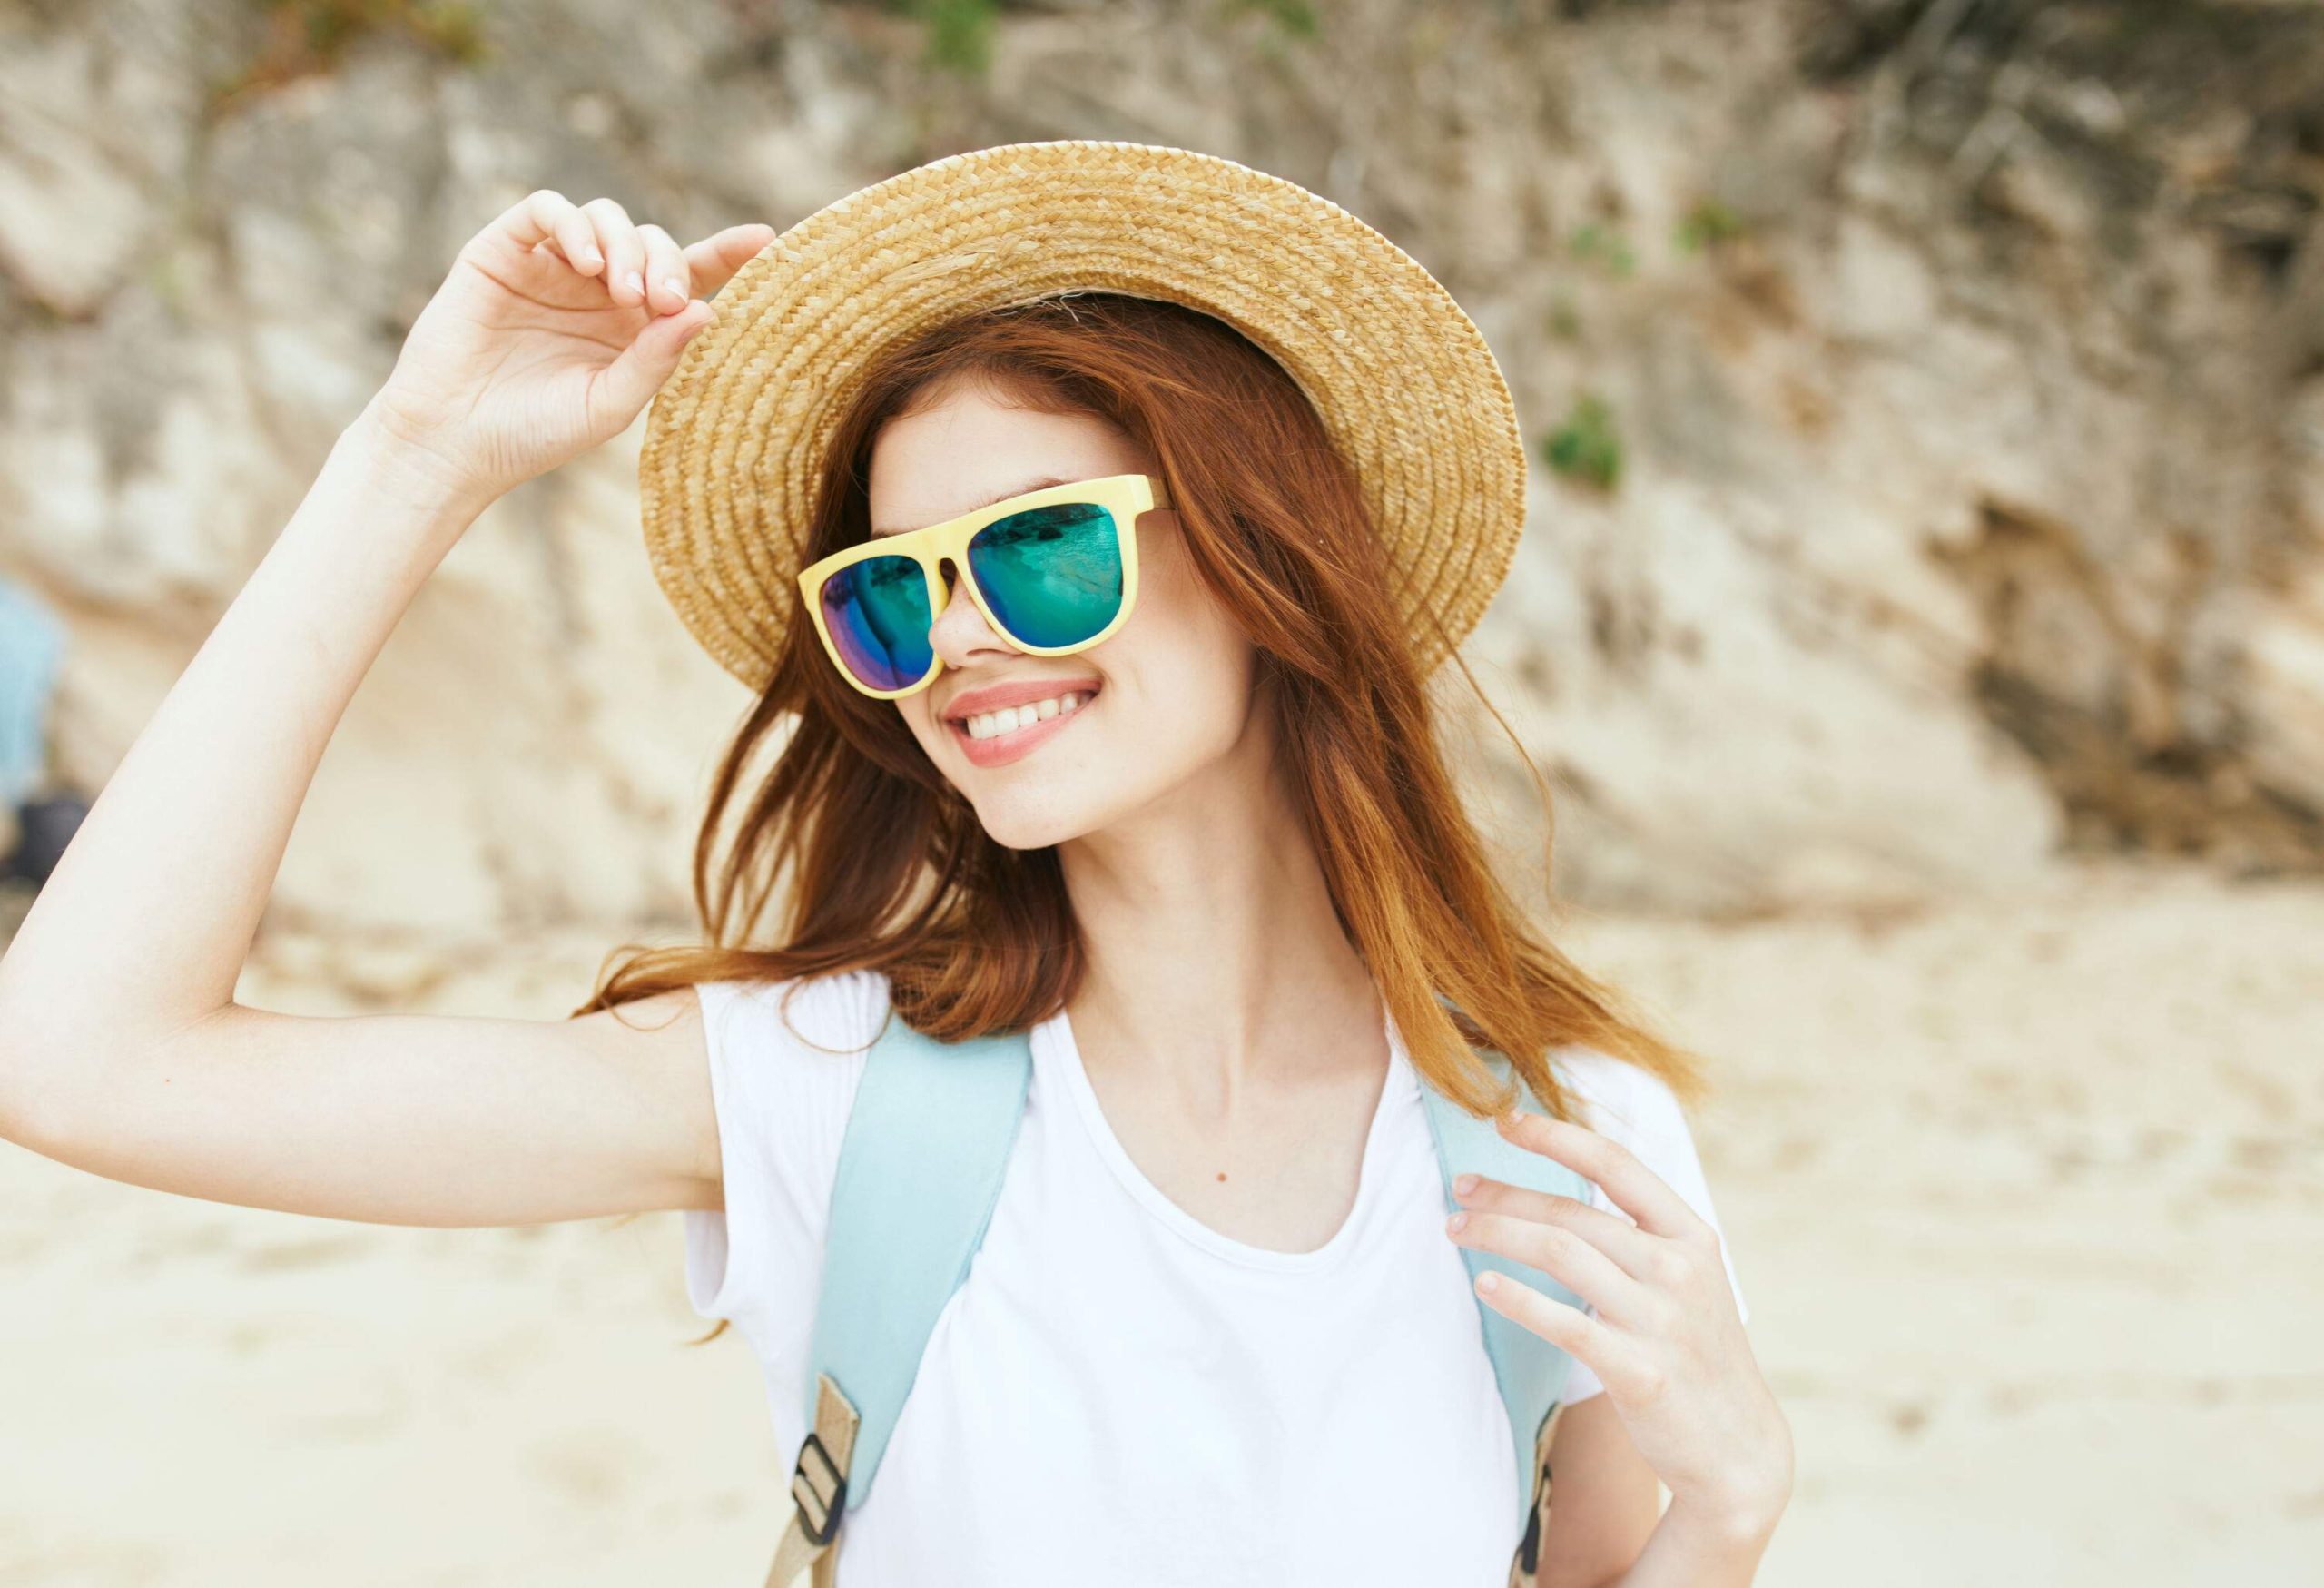 A happy young woman standing on the beach sporting a straw hat, a white shirt, and yellow sunglasses.